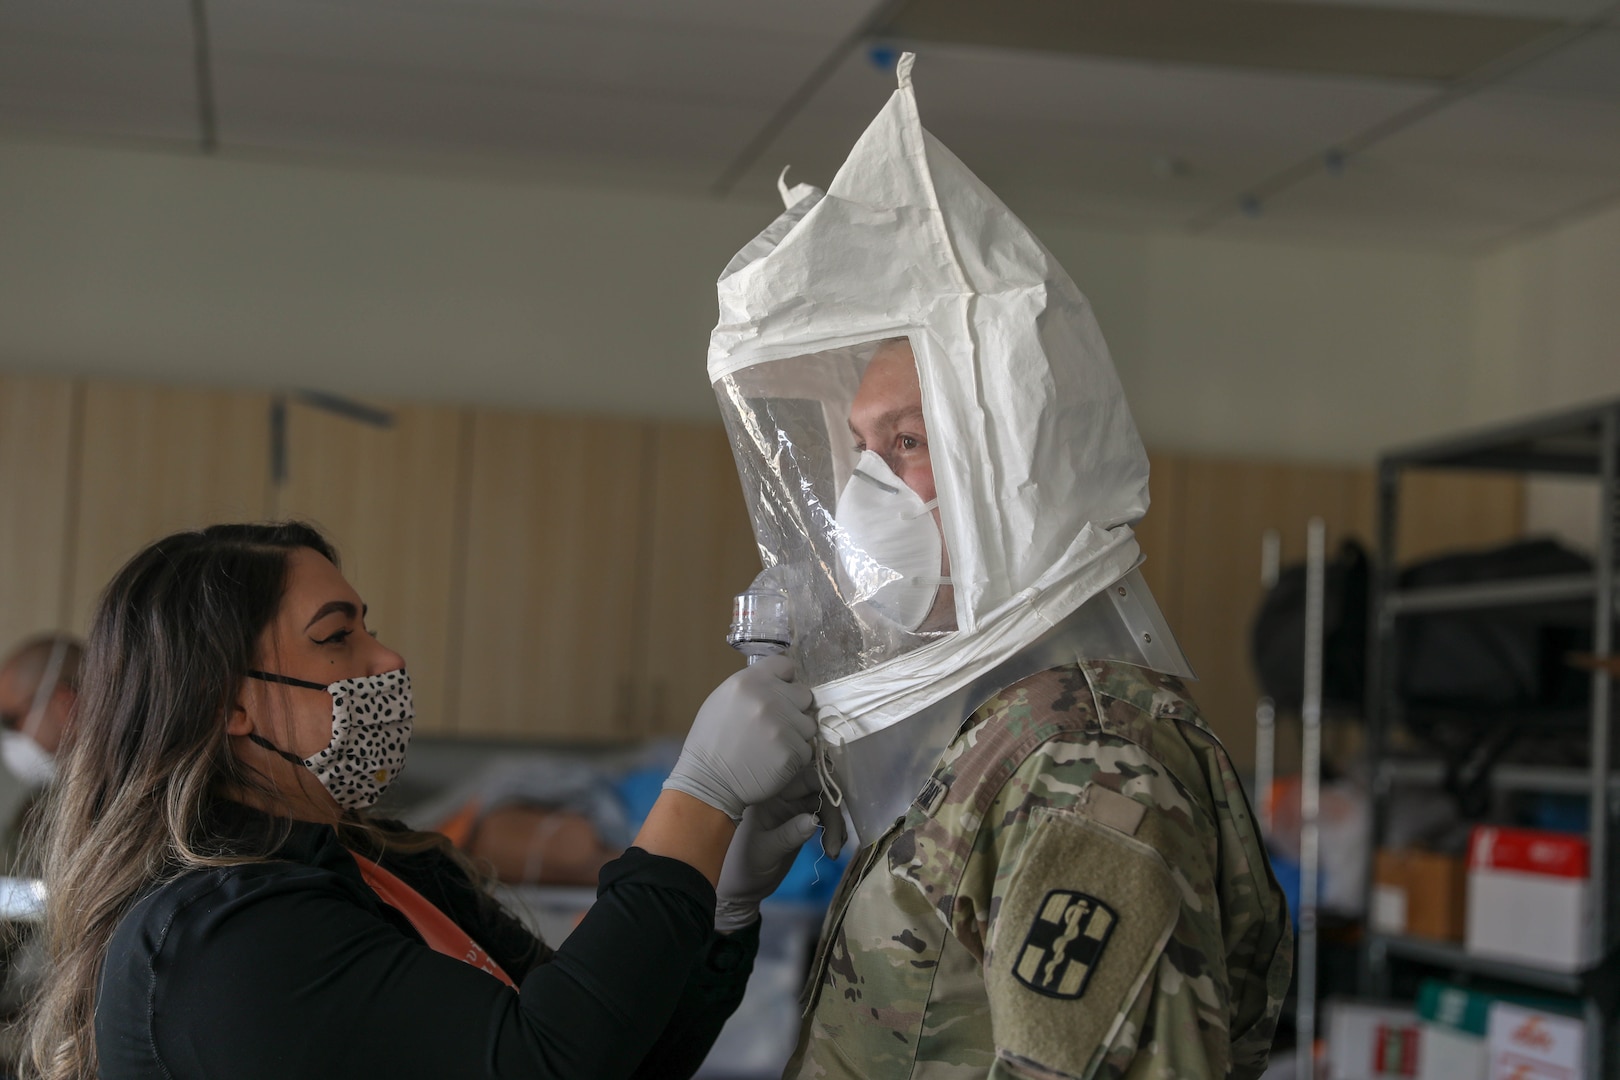 A U.S. Army medical provider from Fort Carson, Colorado, is fit-tested for his personal protective equipment at the Riverside University Healthcare System in Riverside, California, Jan. 7, 2021